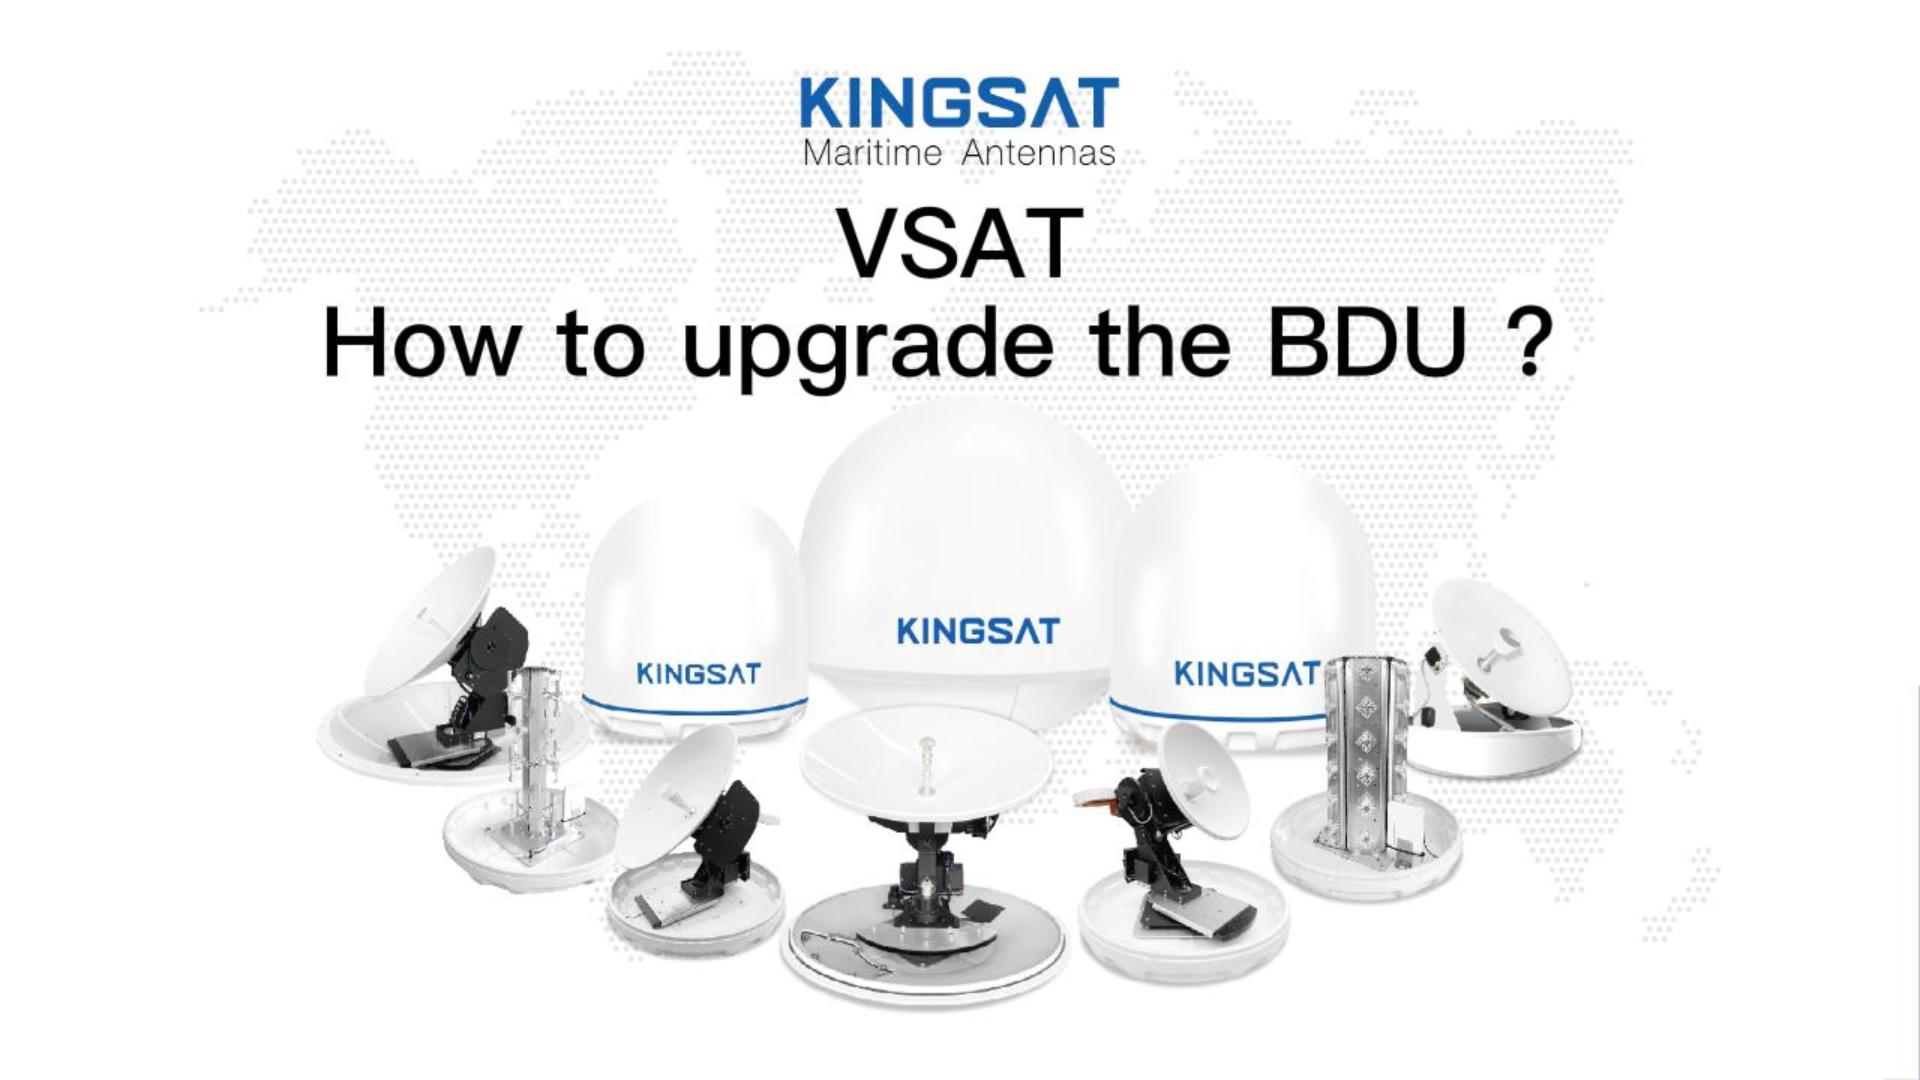 How to upgrade BDU？